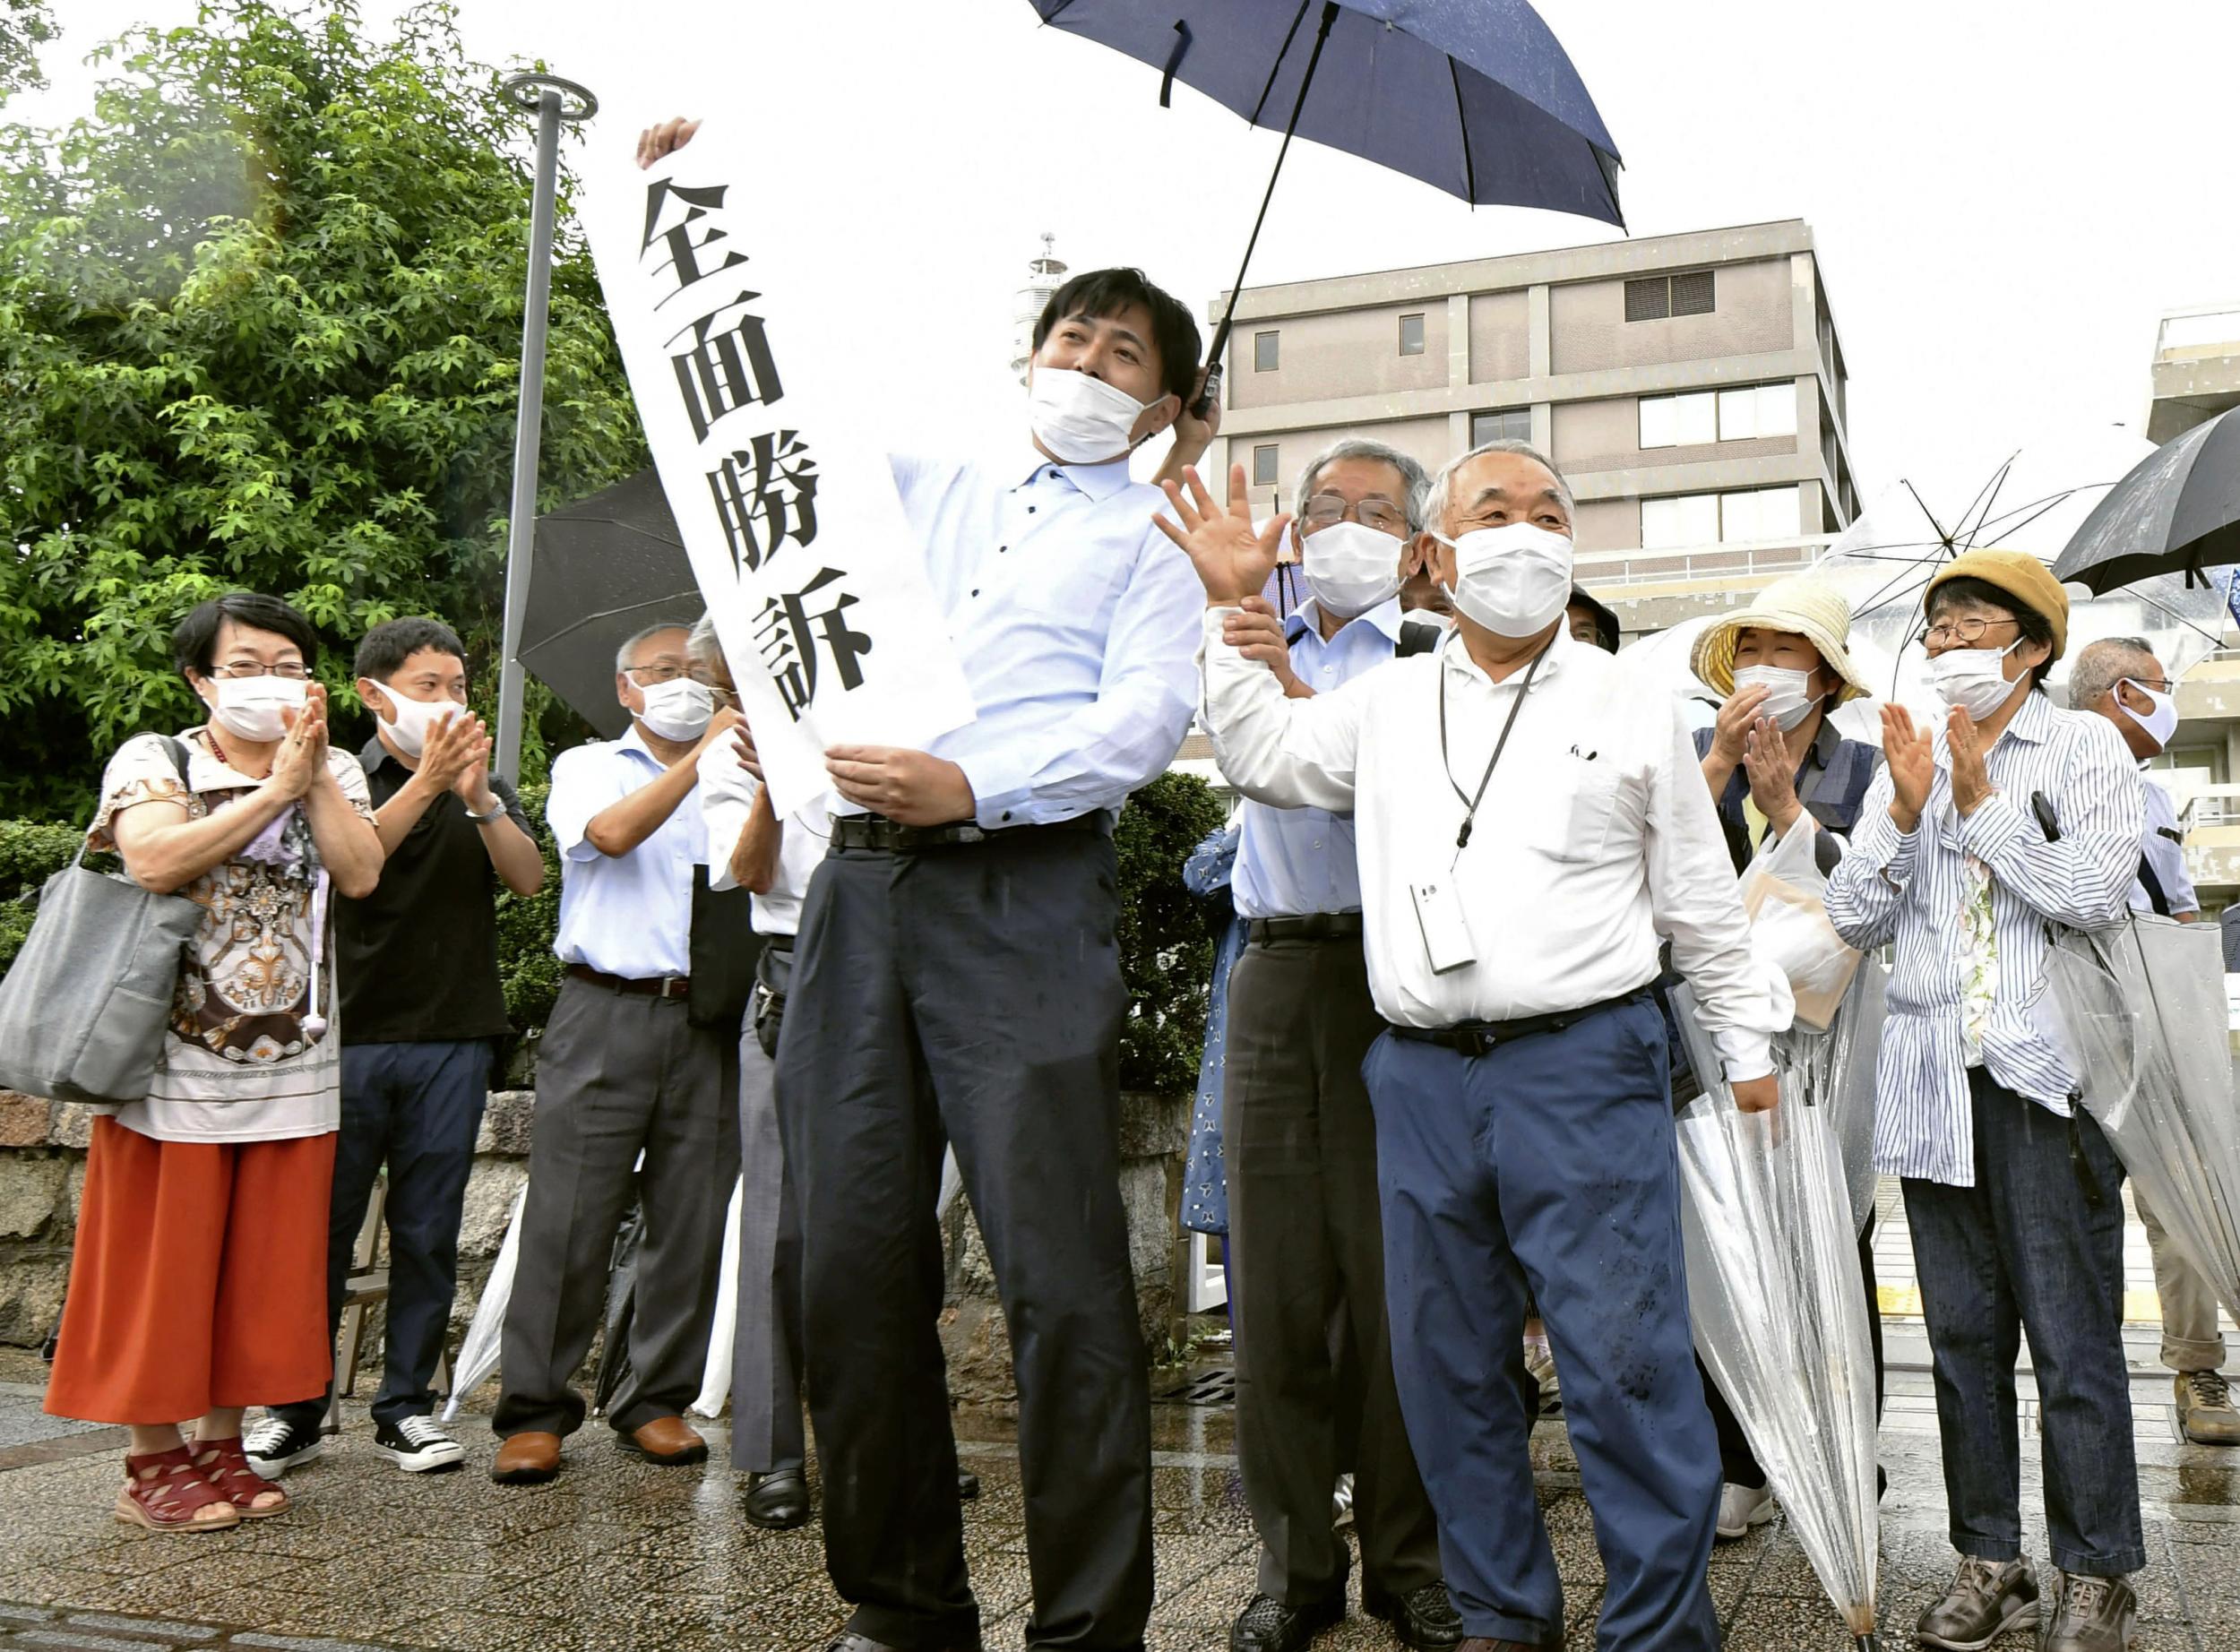 A group of supporters for plaintiffs celebrate, holding a banner which reads ‘Overall victory’ outside the Hiroshima district court